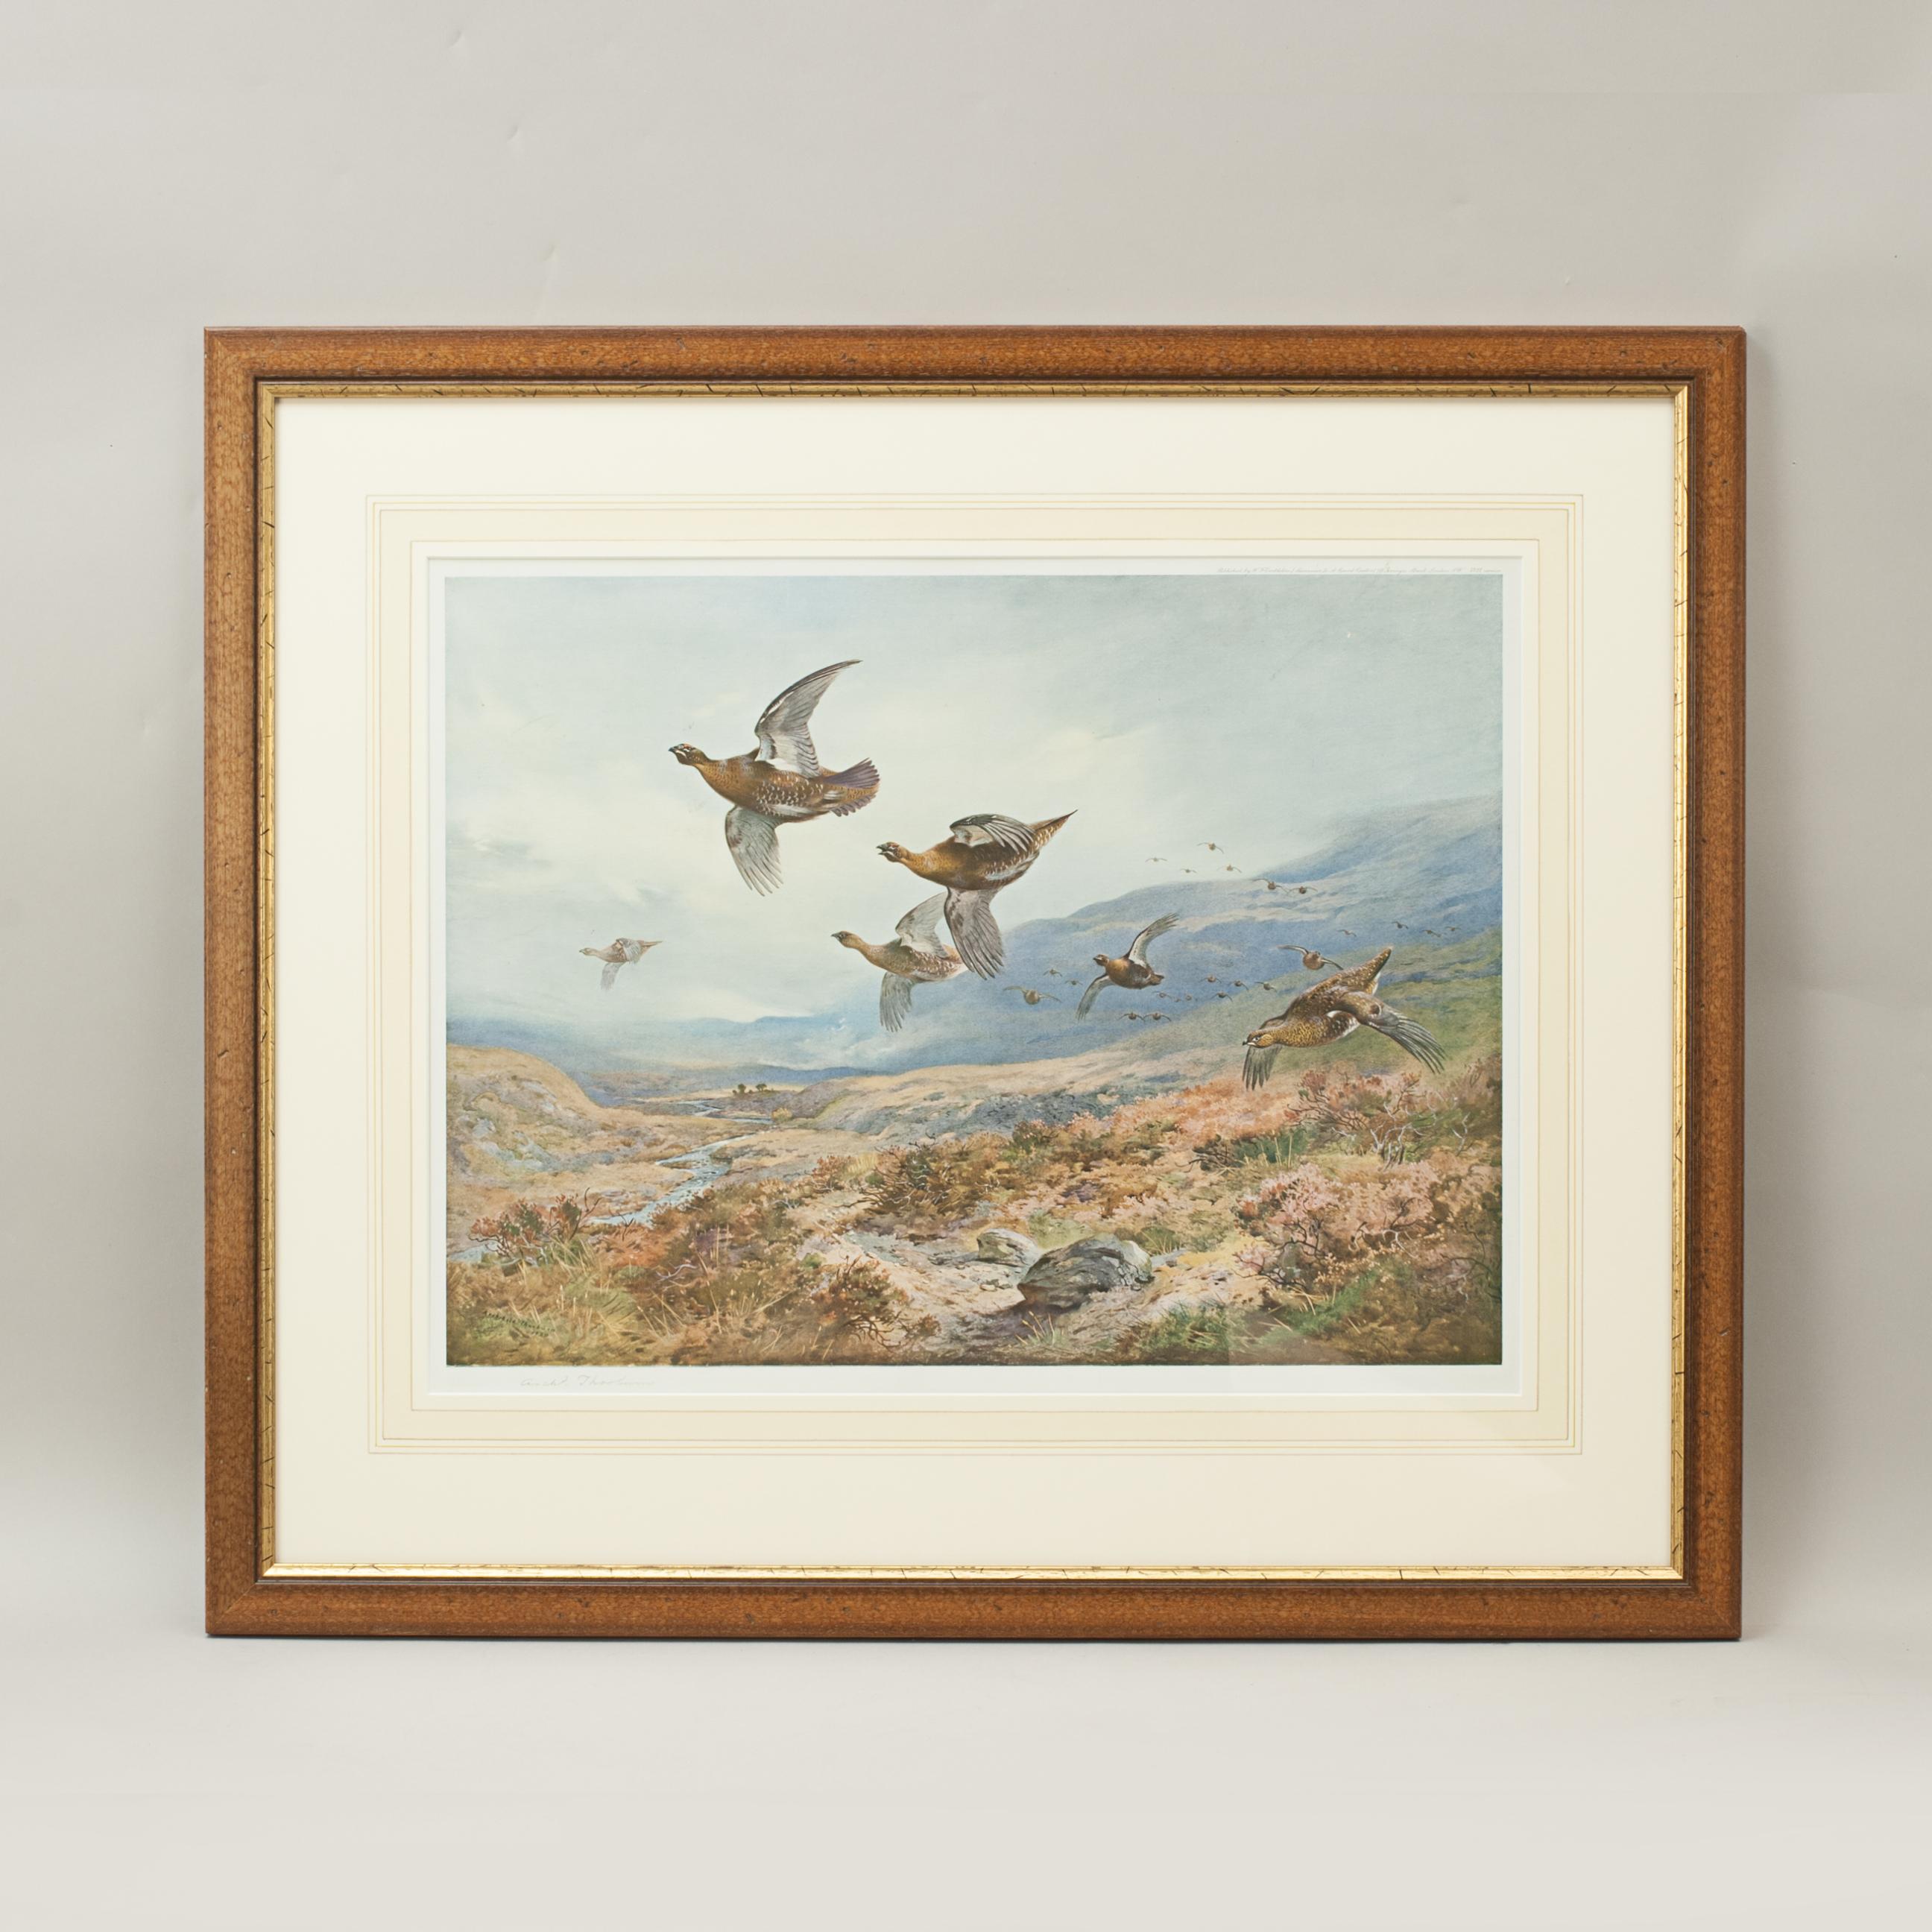 Antique Shooting Picture, Grouse Over the Moors by Archibald Thorburn 3